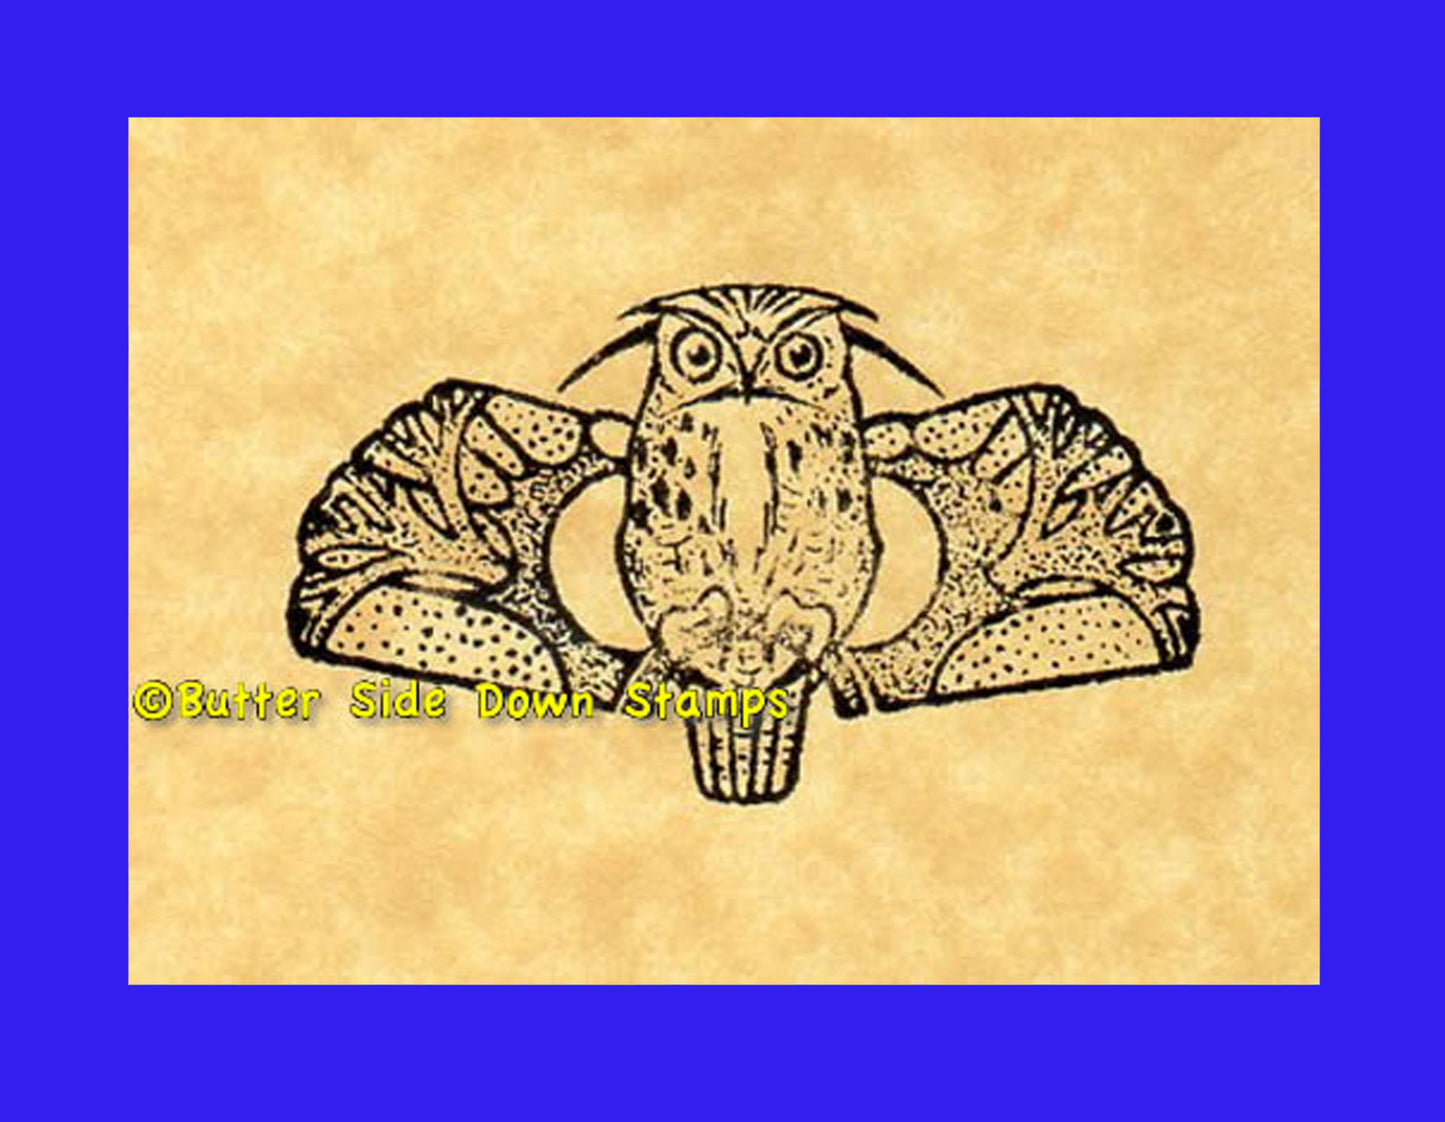 Great horned owl motif rubber stamp